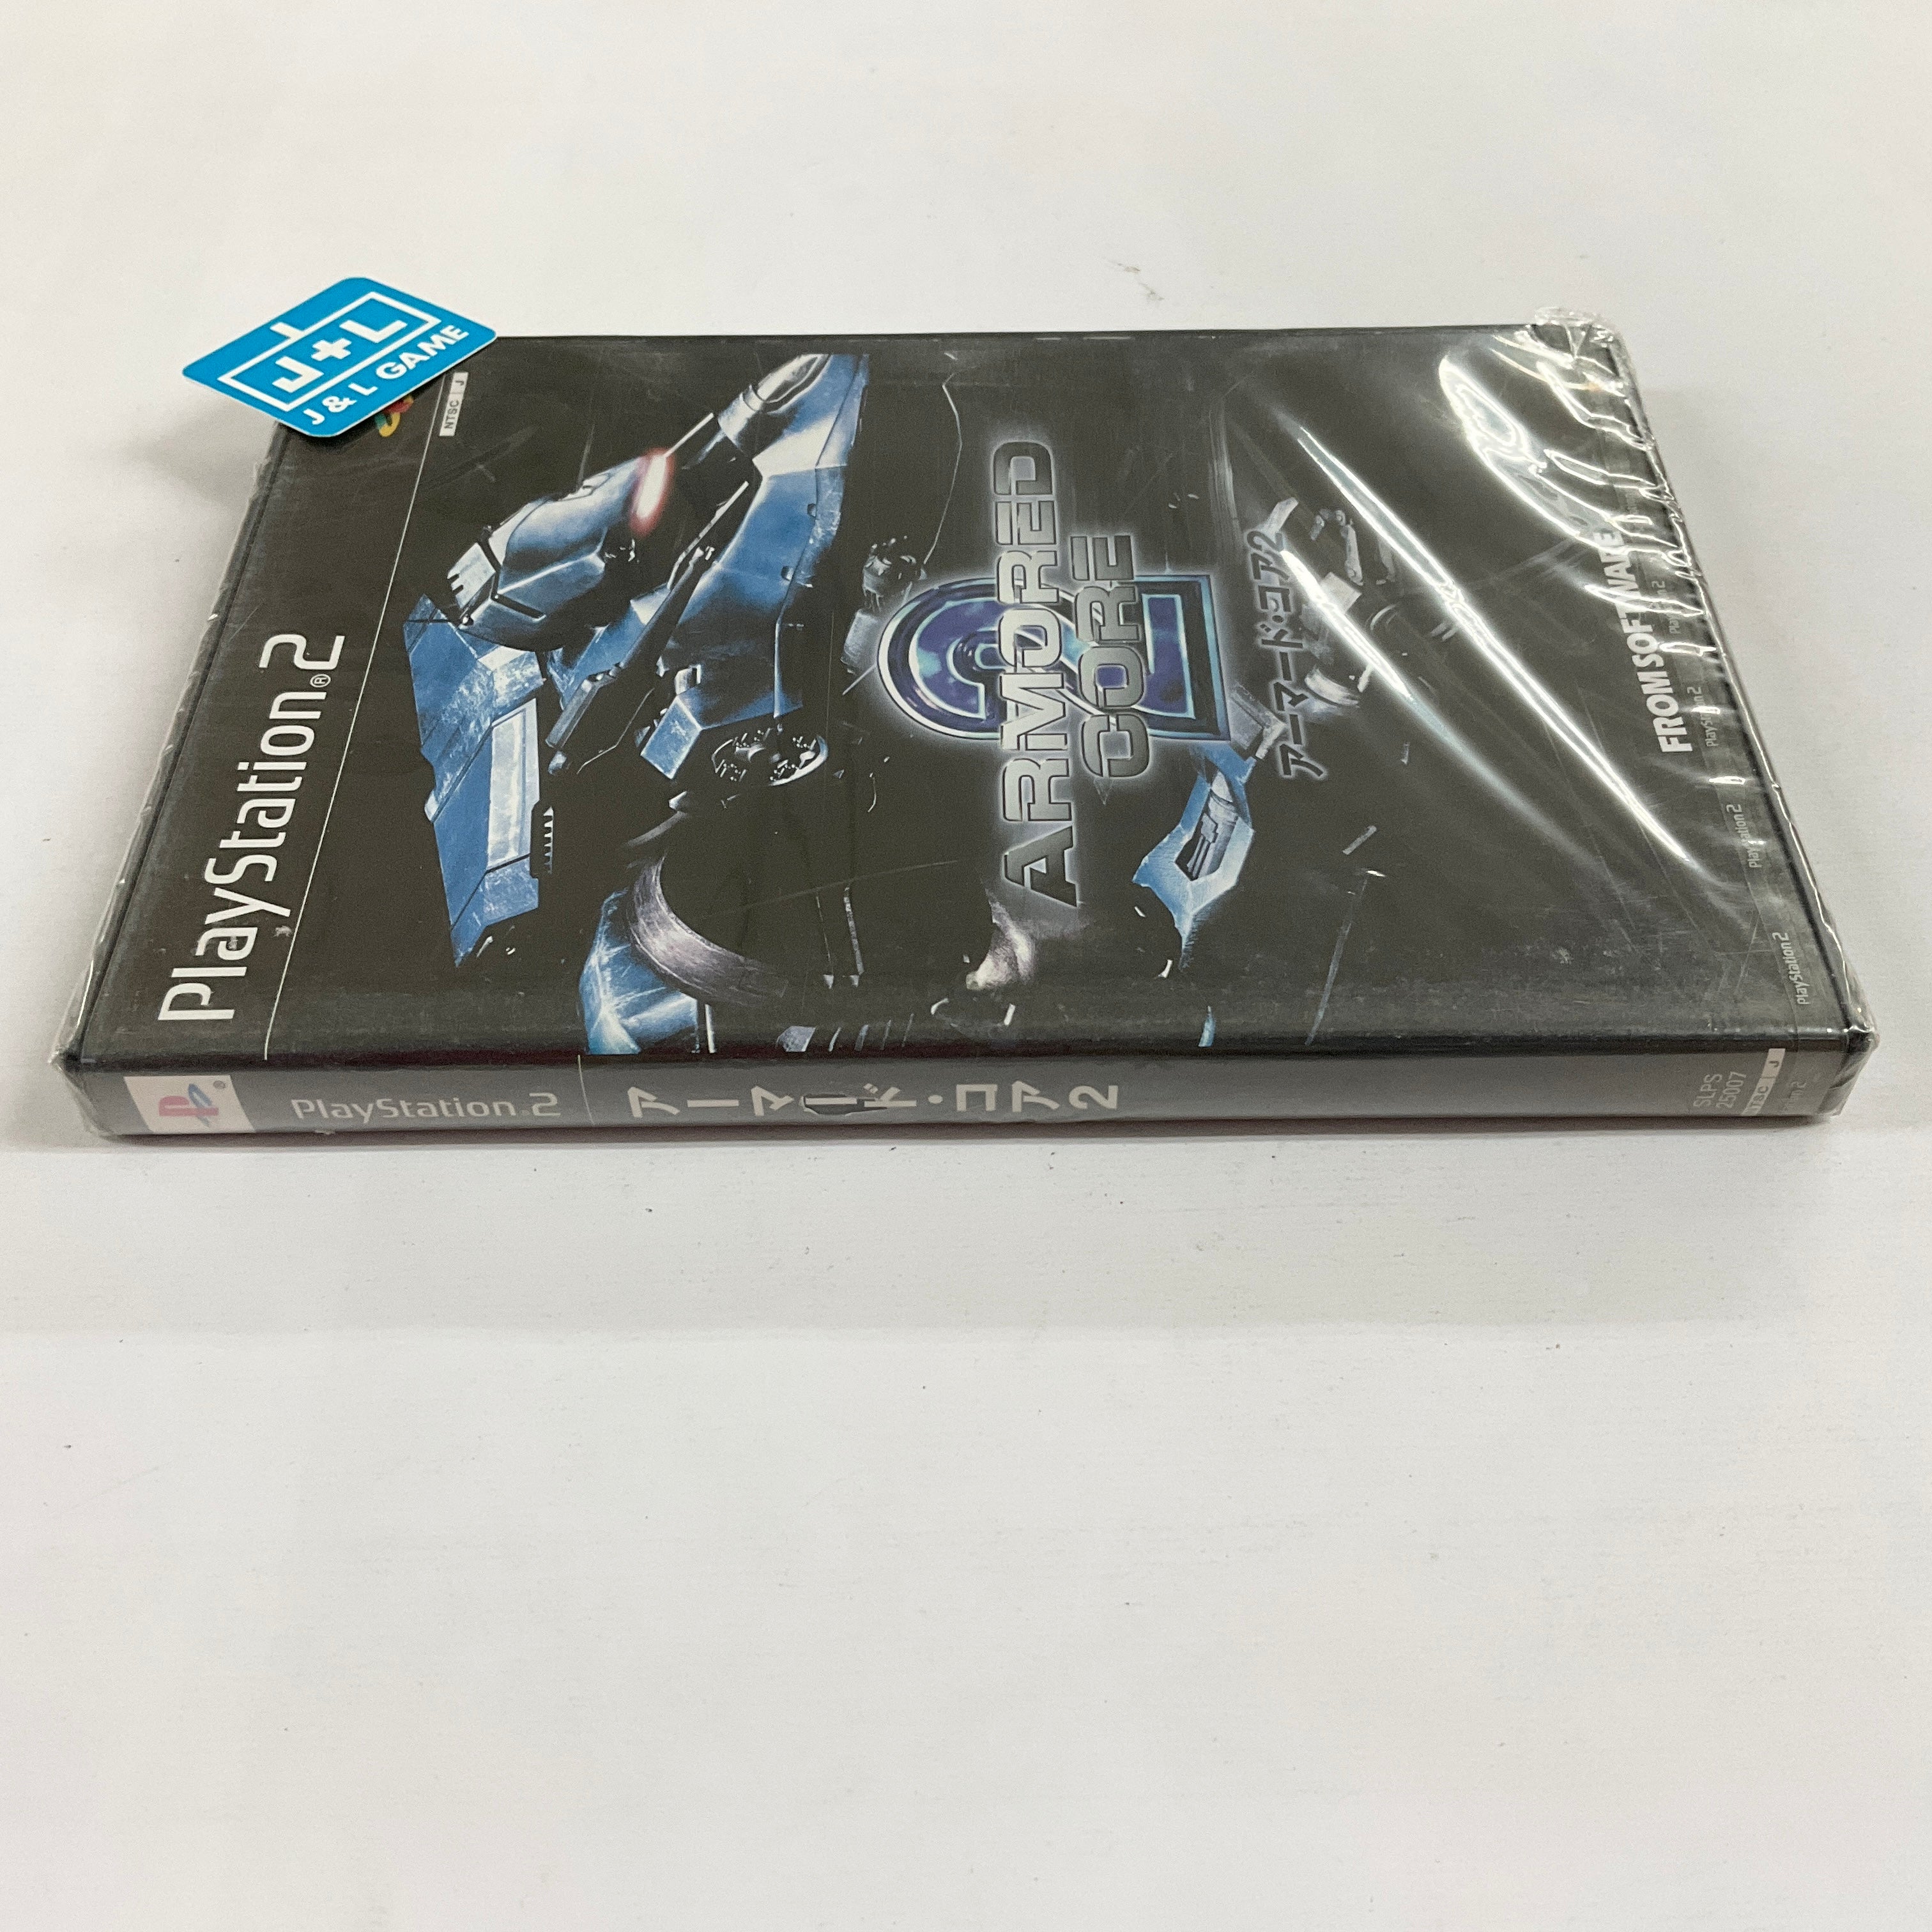 Armored Core 2 - (PS2) PlayStation 2 (Japanese Import) Video Games From Software   